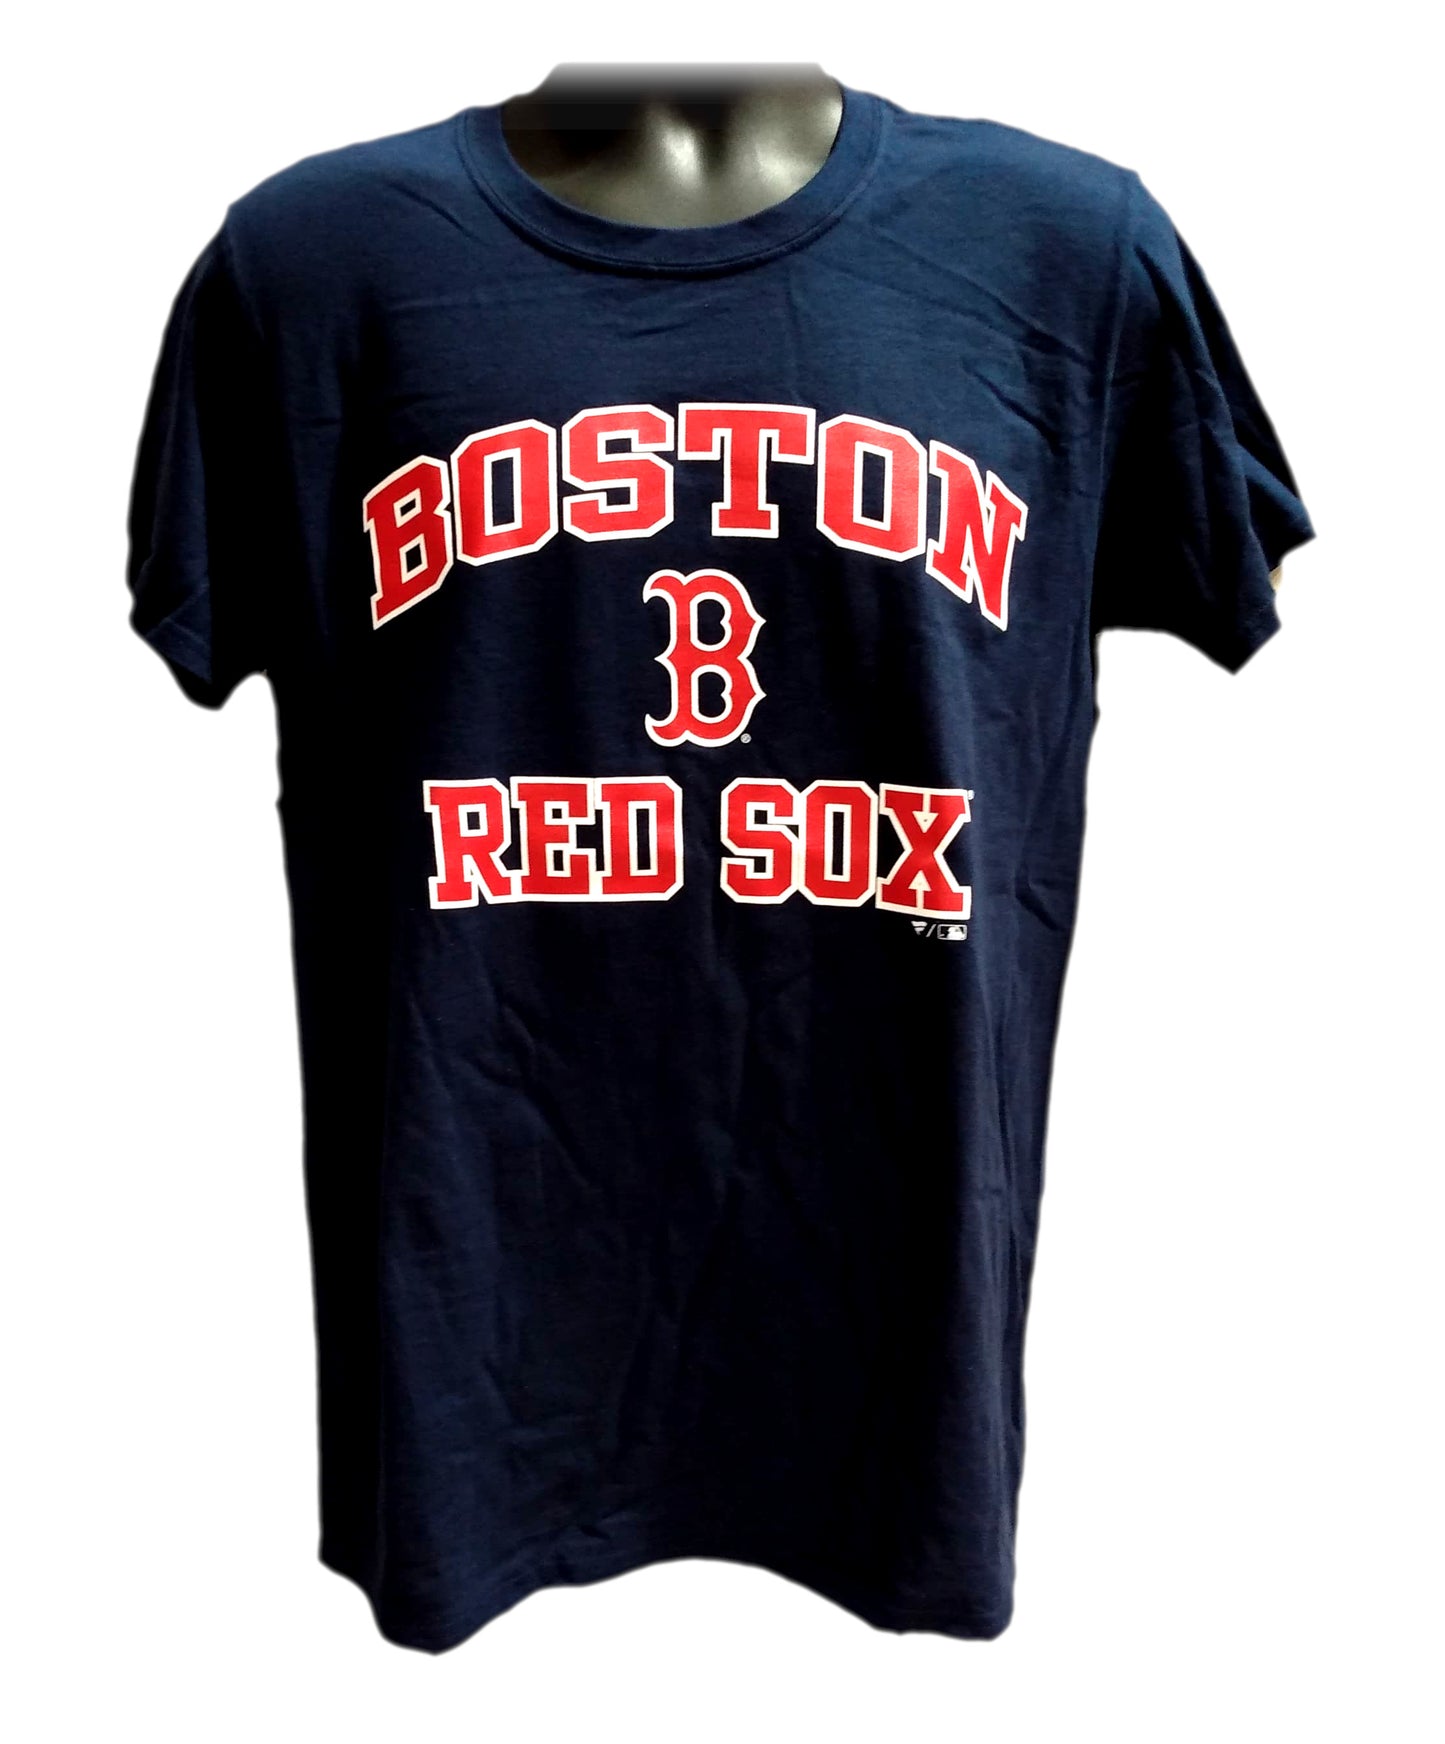 T-SHIRT HEART AND SOUL RED SOX